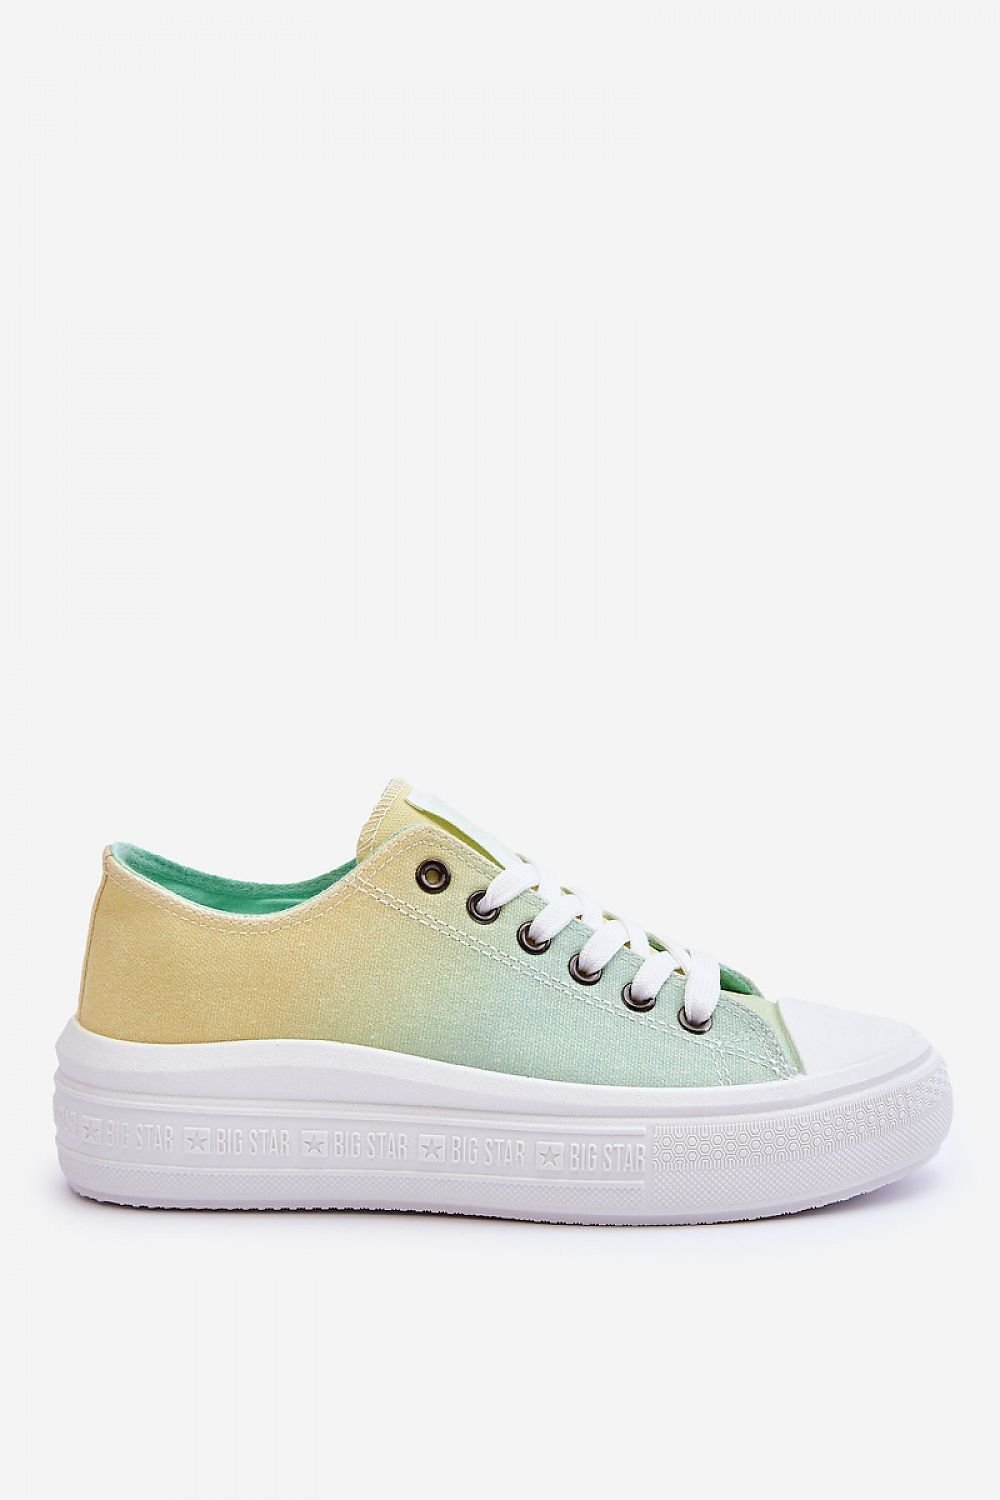 TEEK - Yellow Green Ombre Laced Platform Sneakers SHOES TEEK MH   